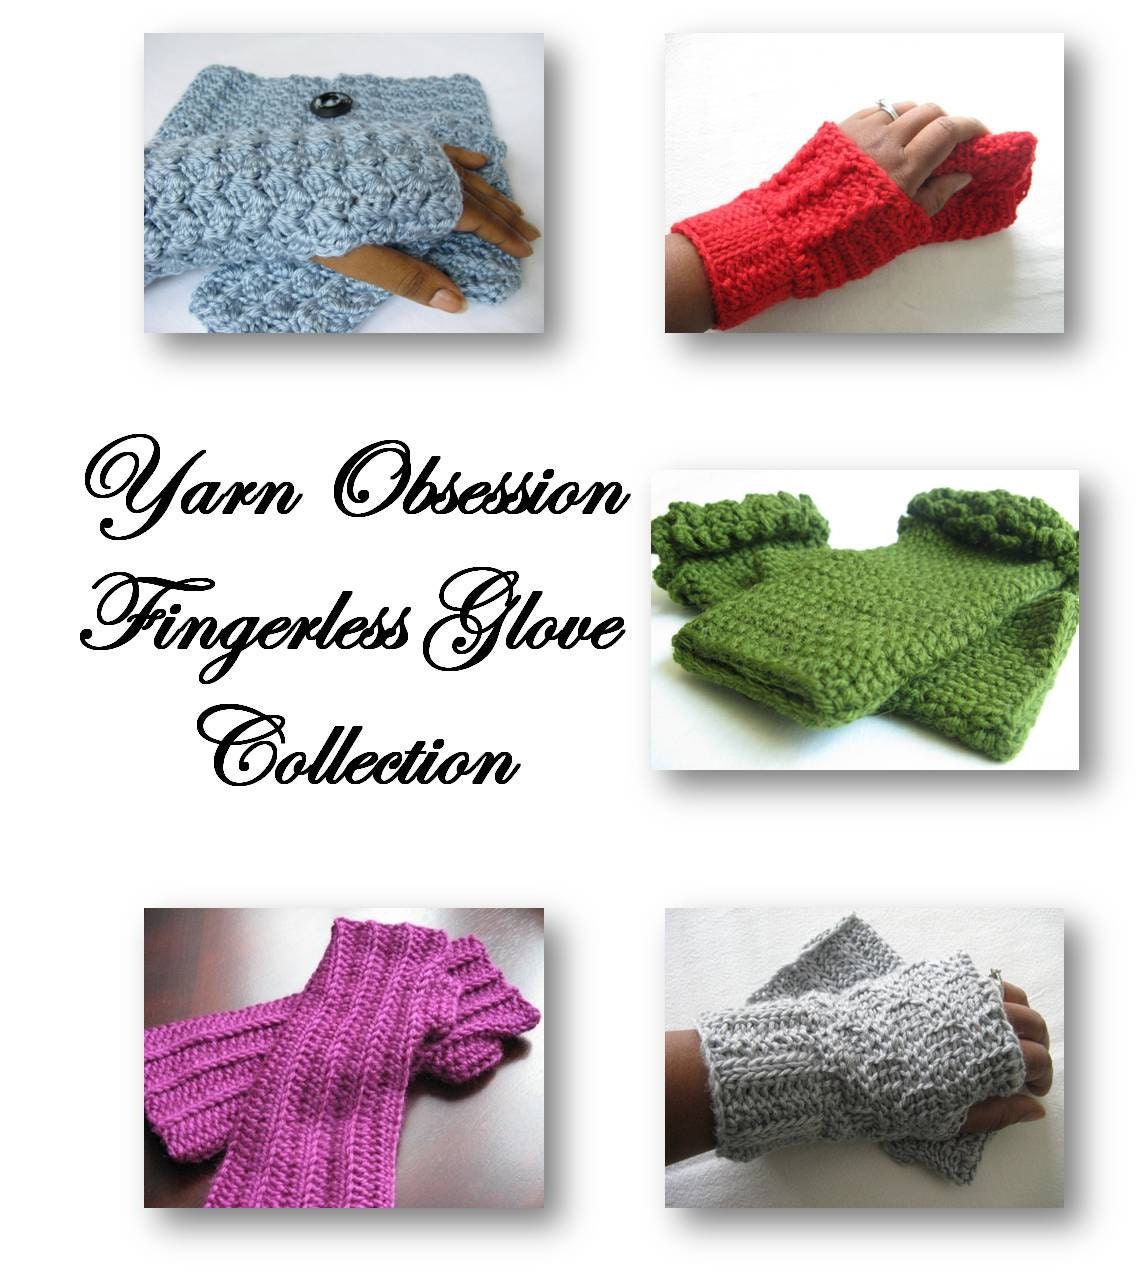 Yarn Obsession Fingerless Glove Collection - 5 Patterns - Gift Idea